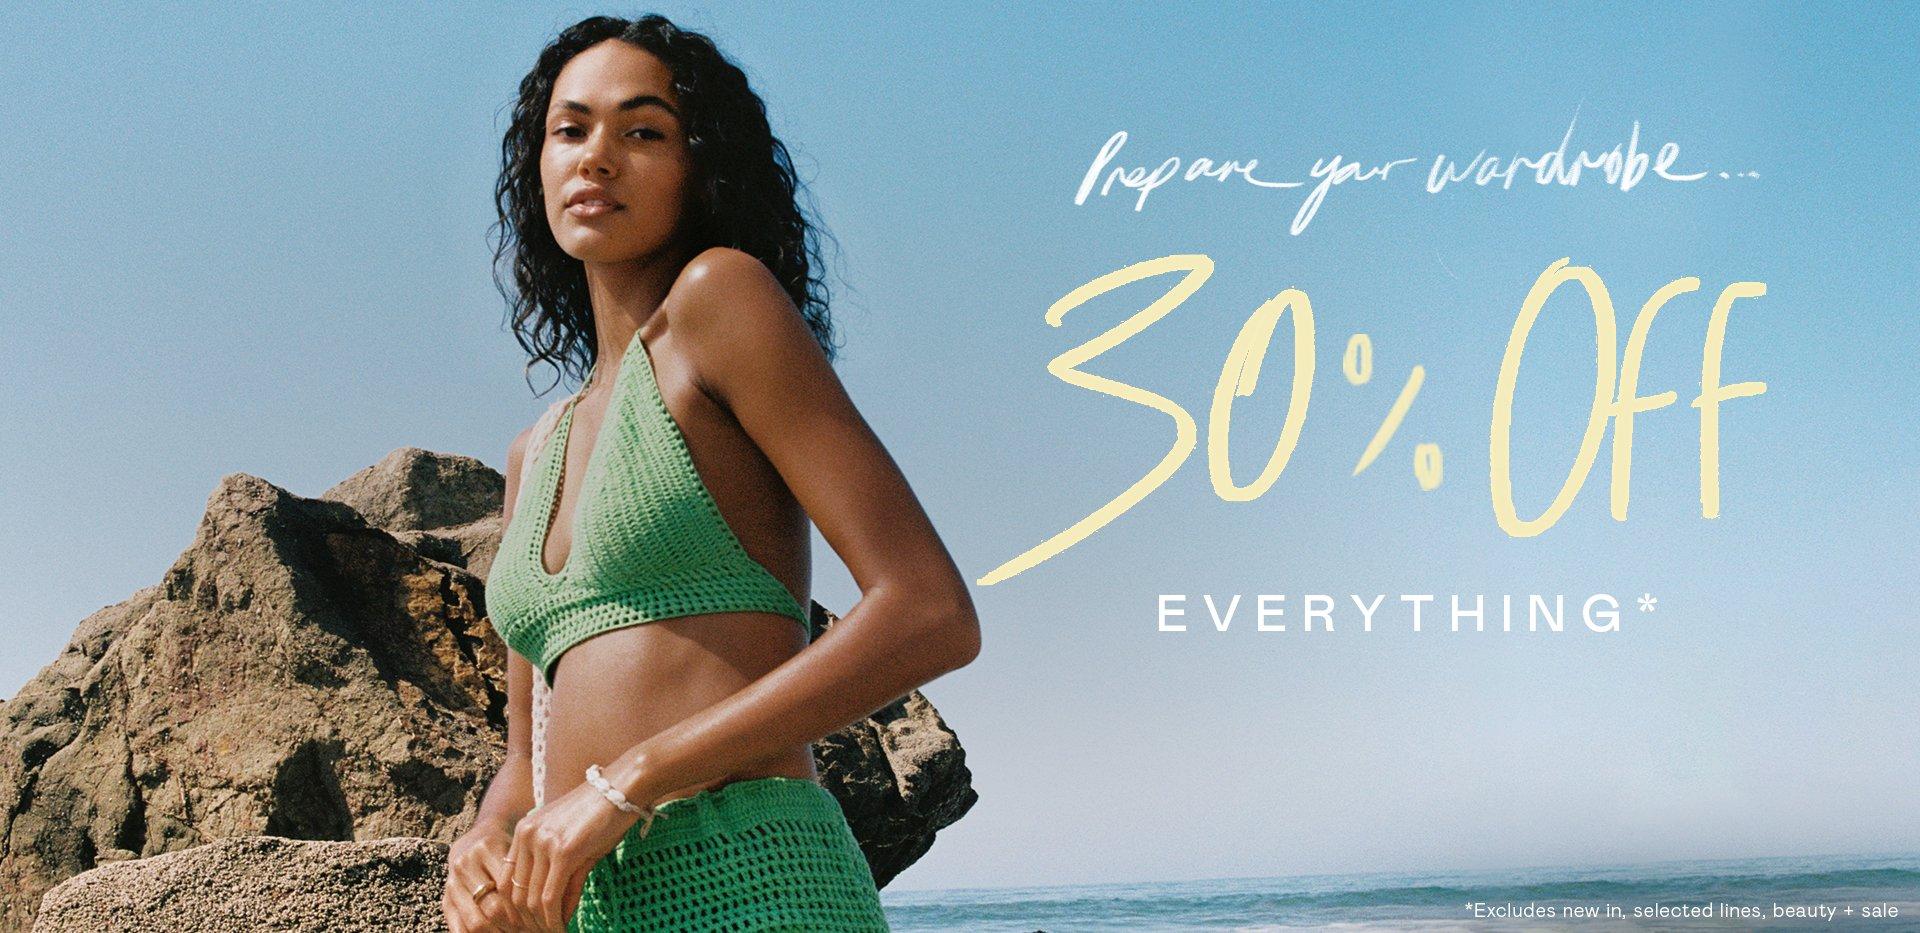 30% OFF Everything!*